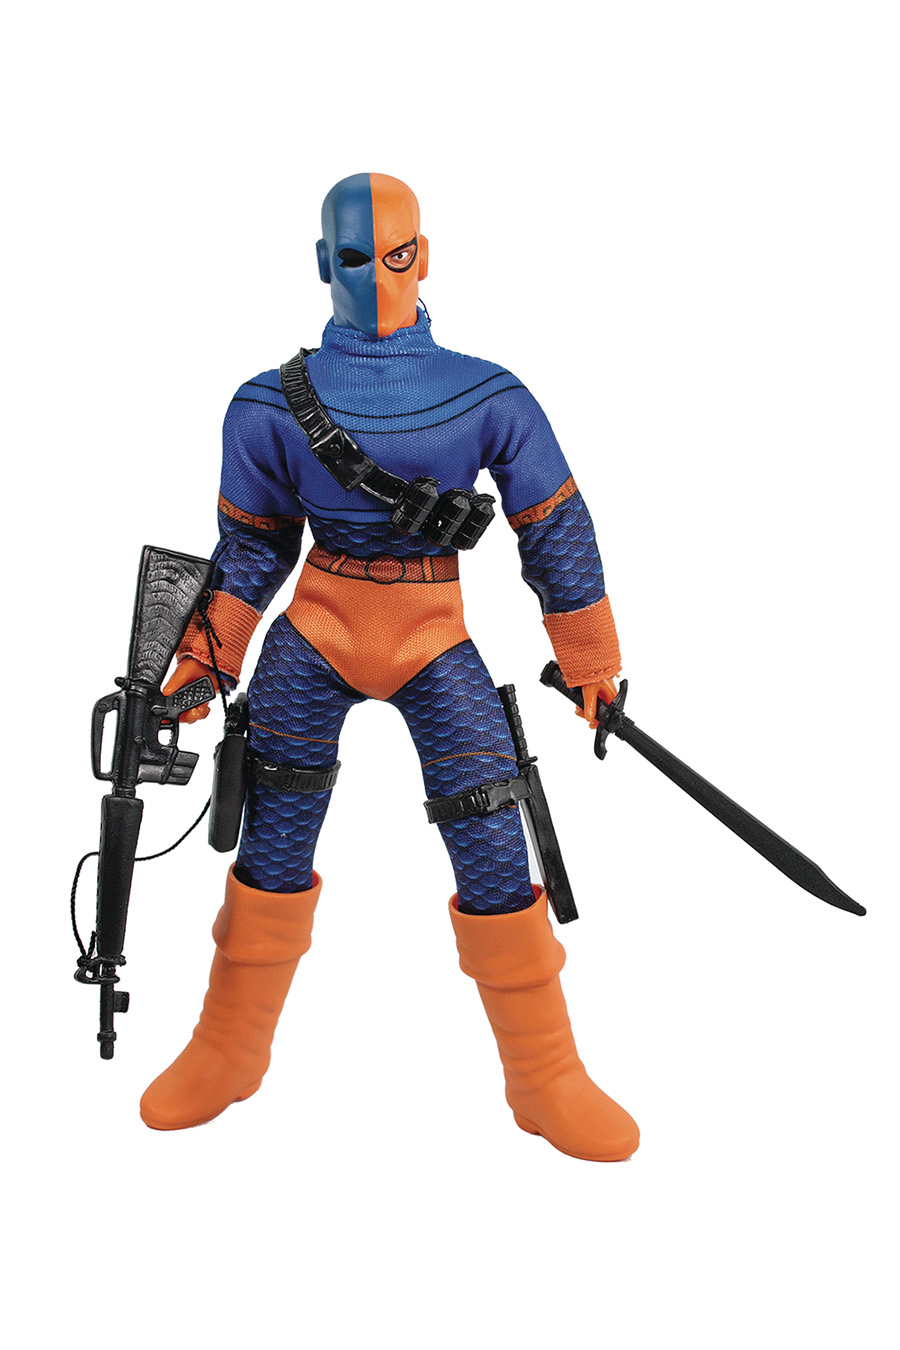 Mego DC Heroes Deathstroke Previews Exclusive 8-Inch Action Figure